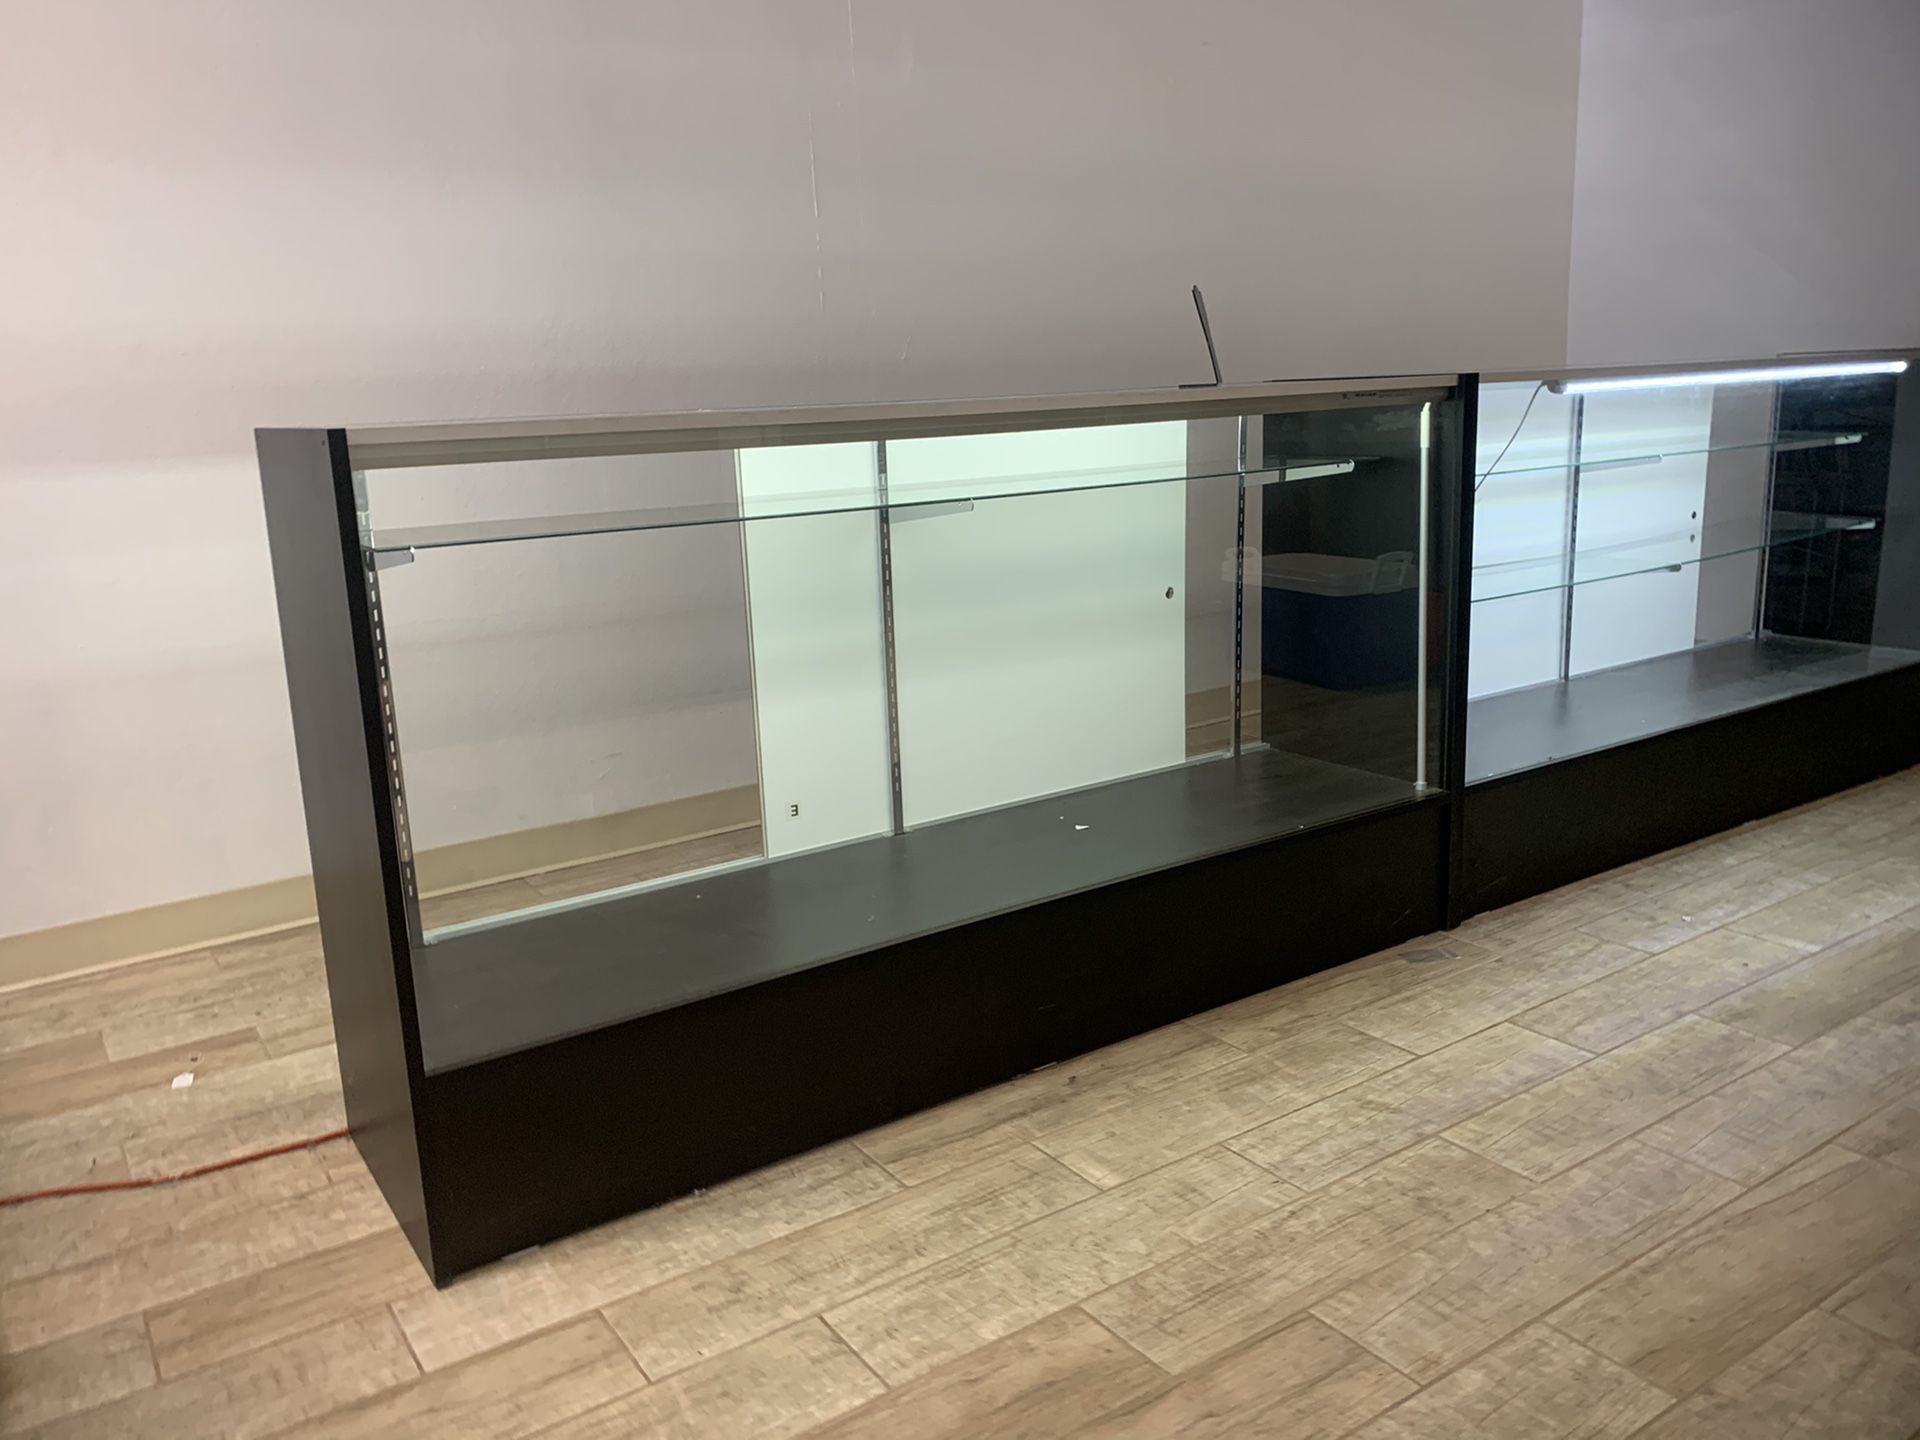 Tw display cases available. Lights and cord. $350